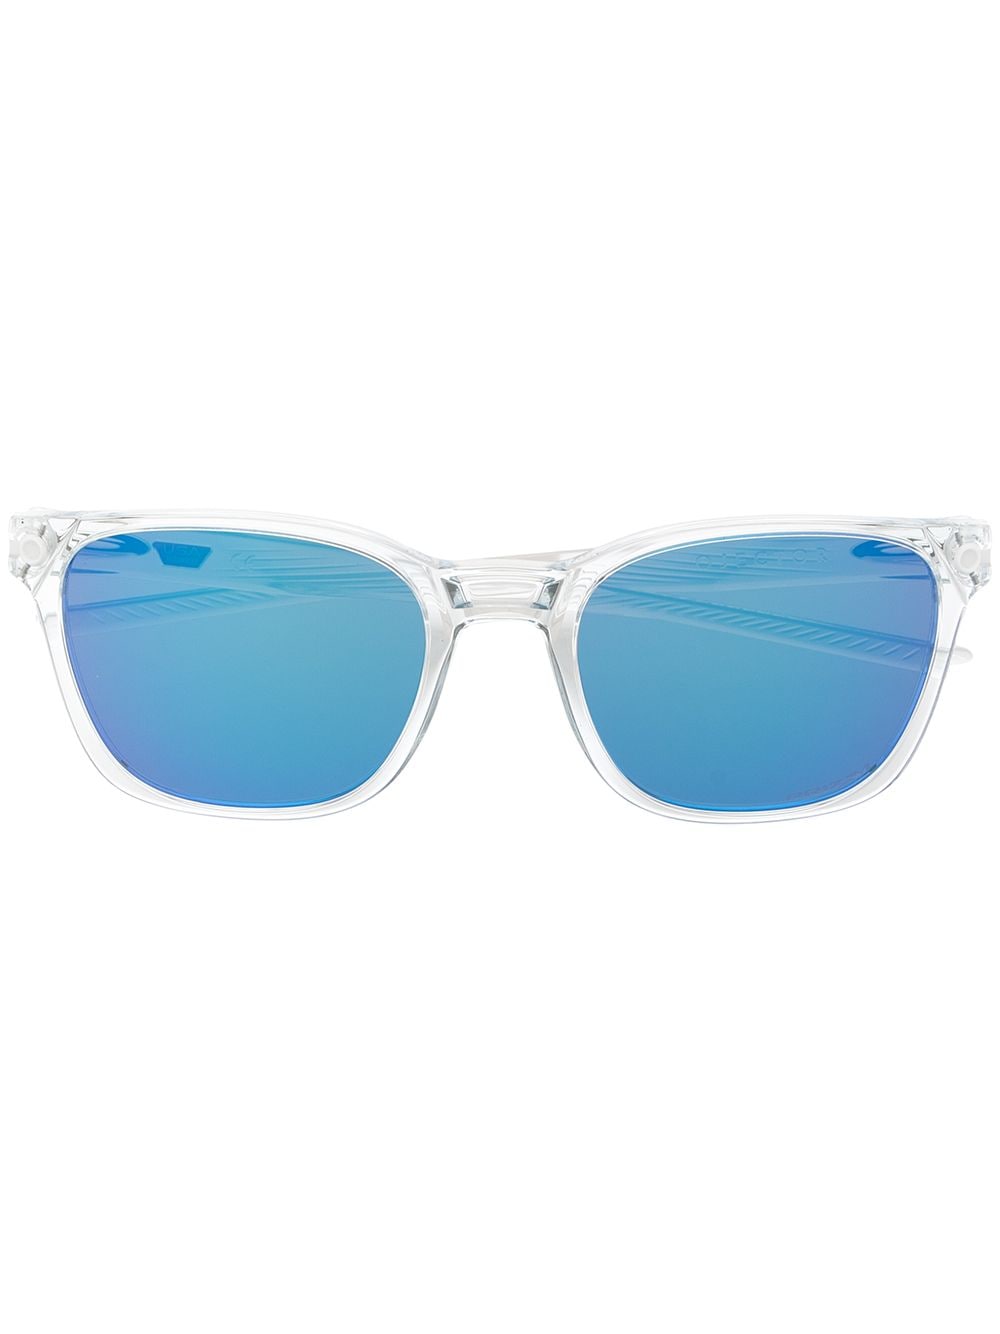 Image 1 of Oakley Objector square-frame sunglasses